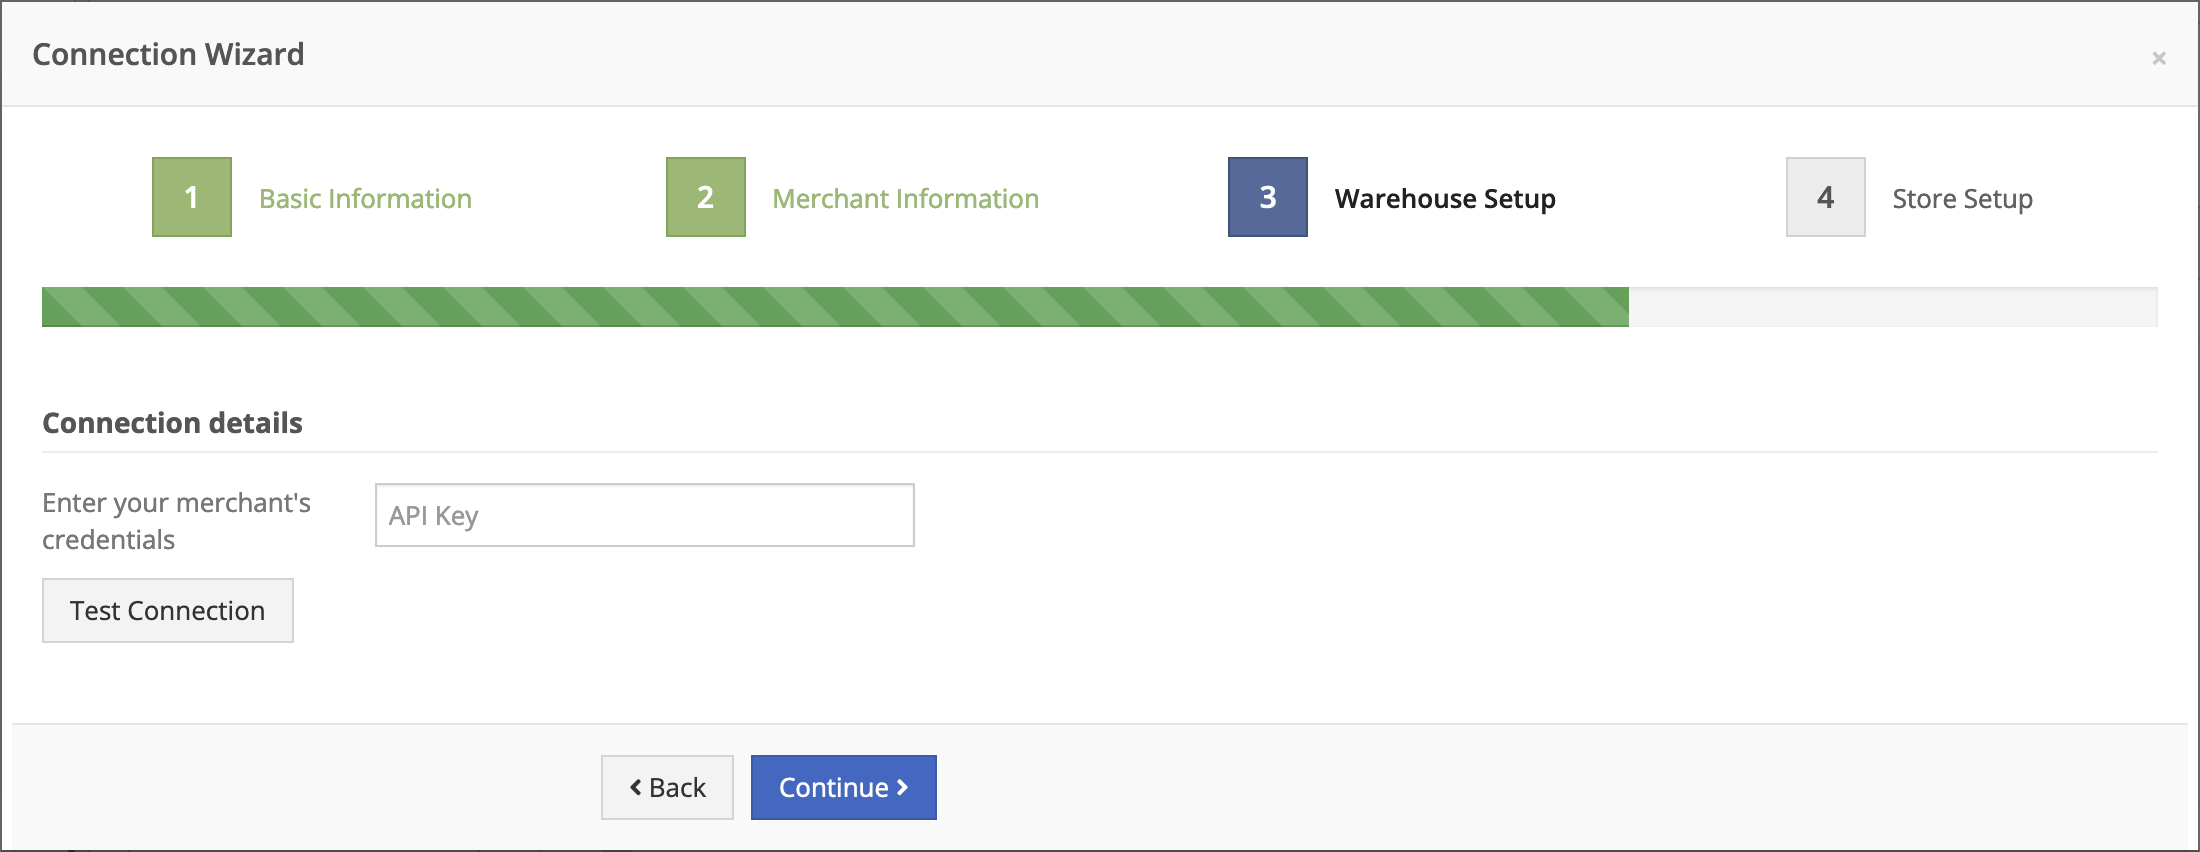 Enter WMS credentials if creating a new merchant. Or, select a warehouse for an existing merchant (choose 'default' if you're not sure).